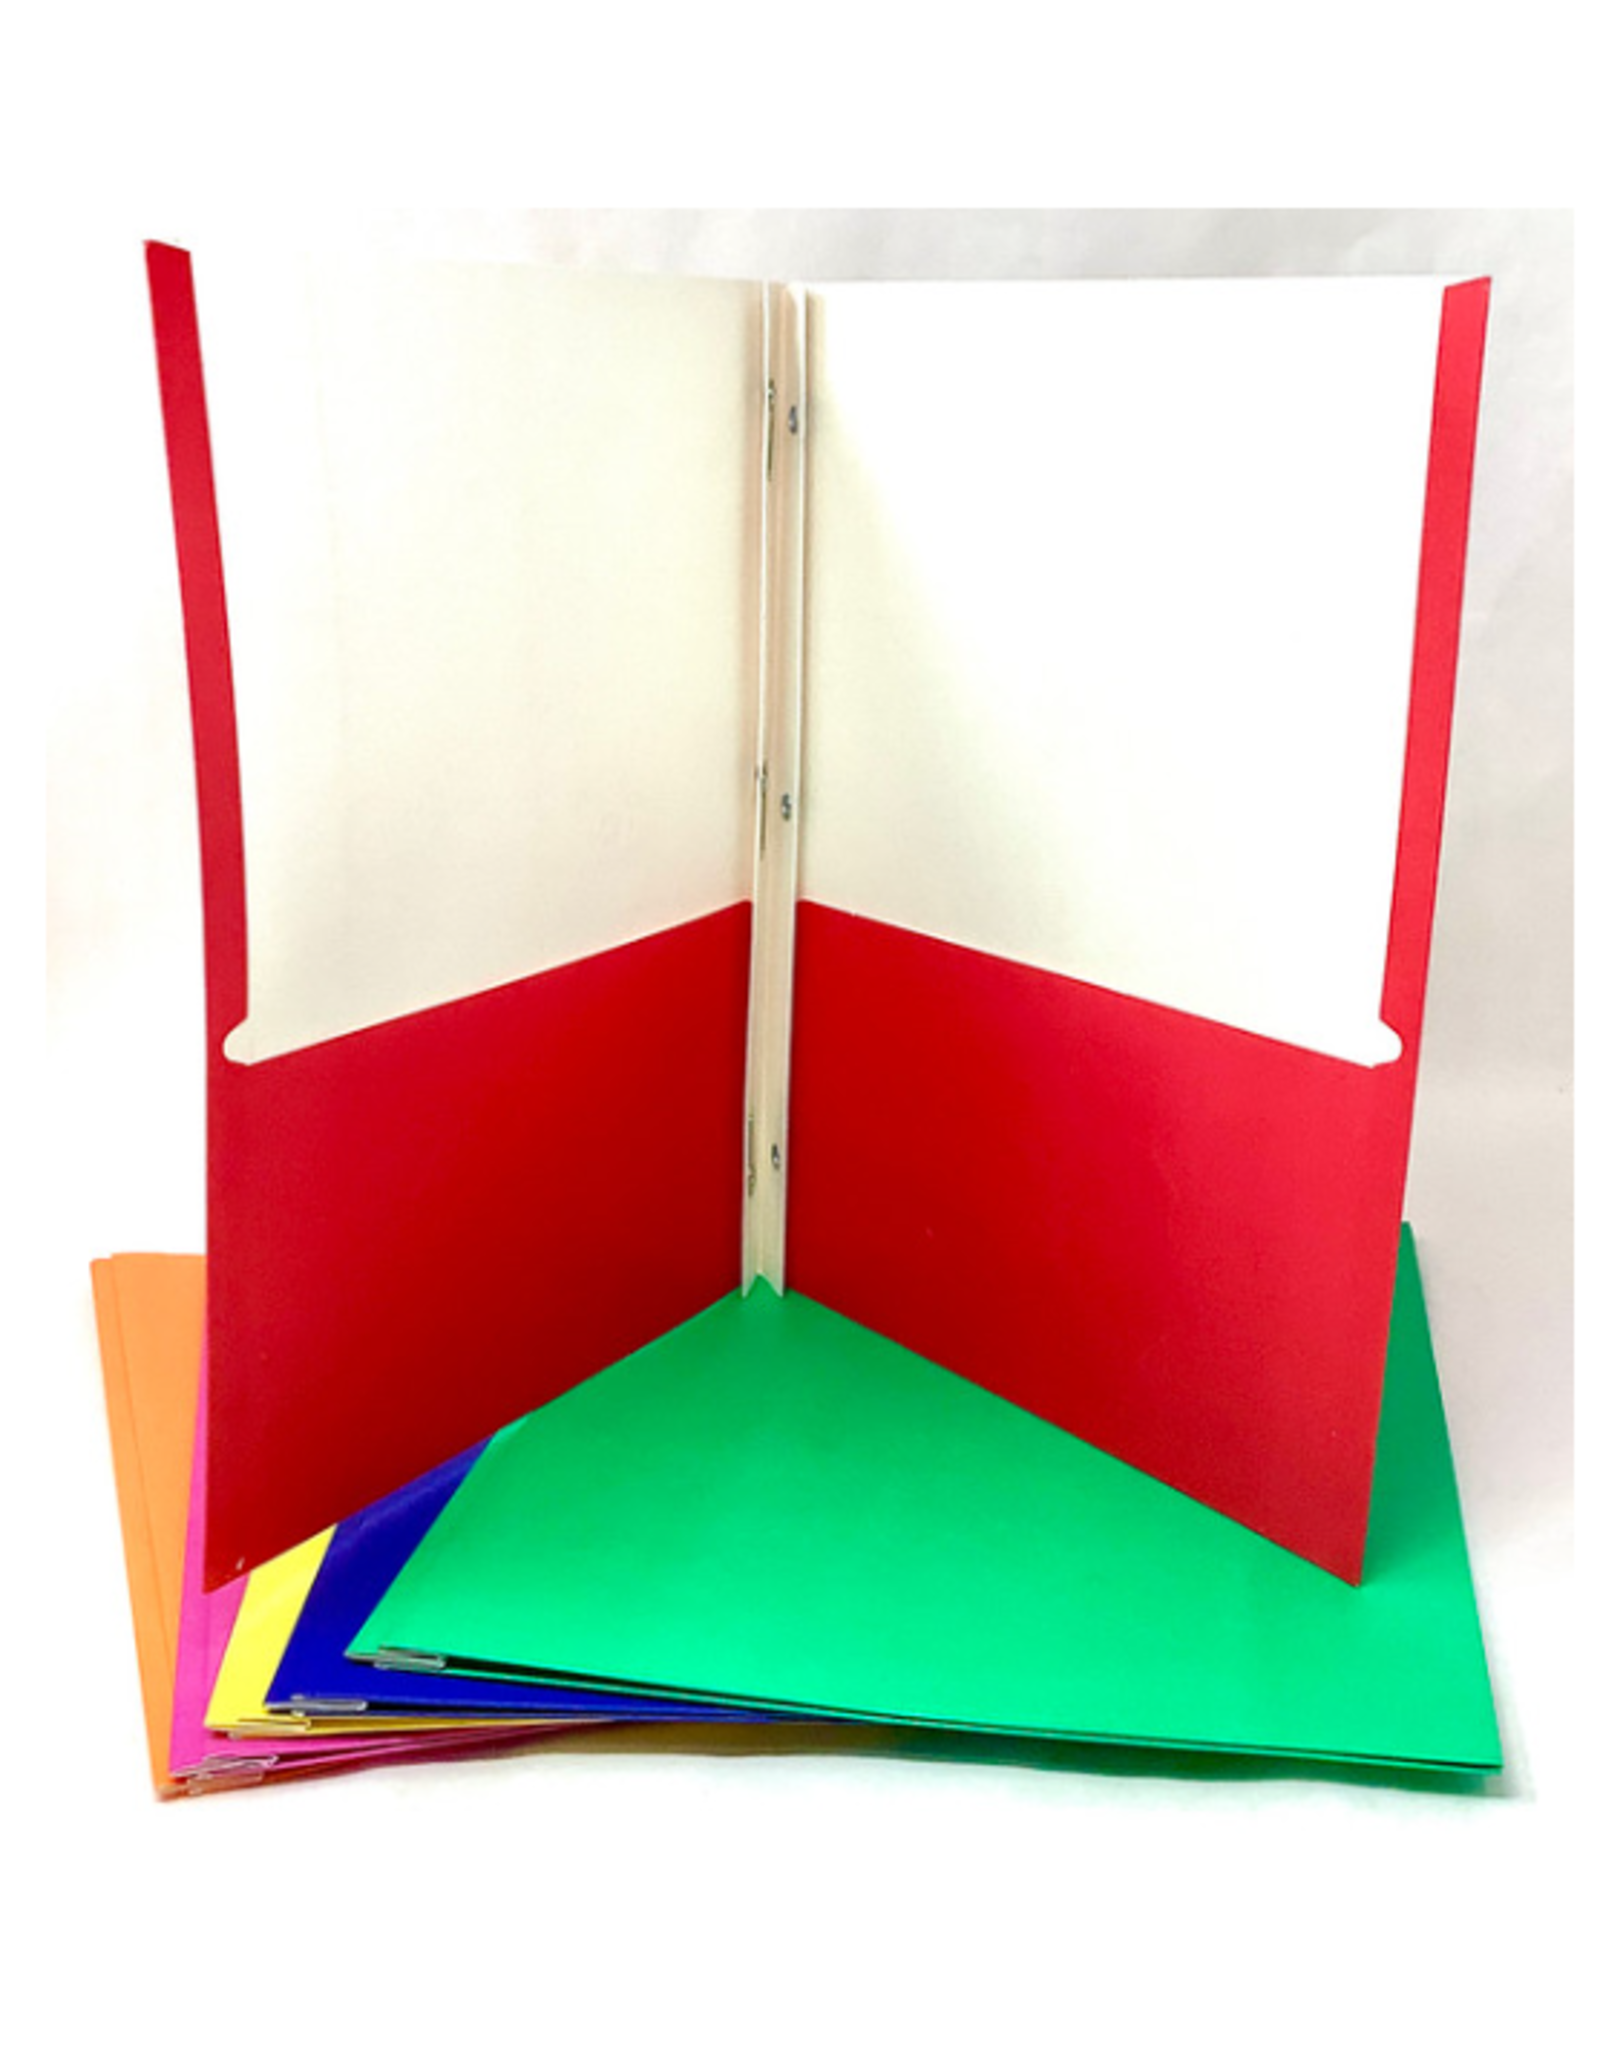 iScholar 2 POCKET PAPER PORTFOLIO WITH PRONGS ASSOTED COLORS